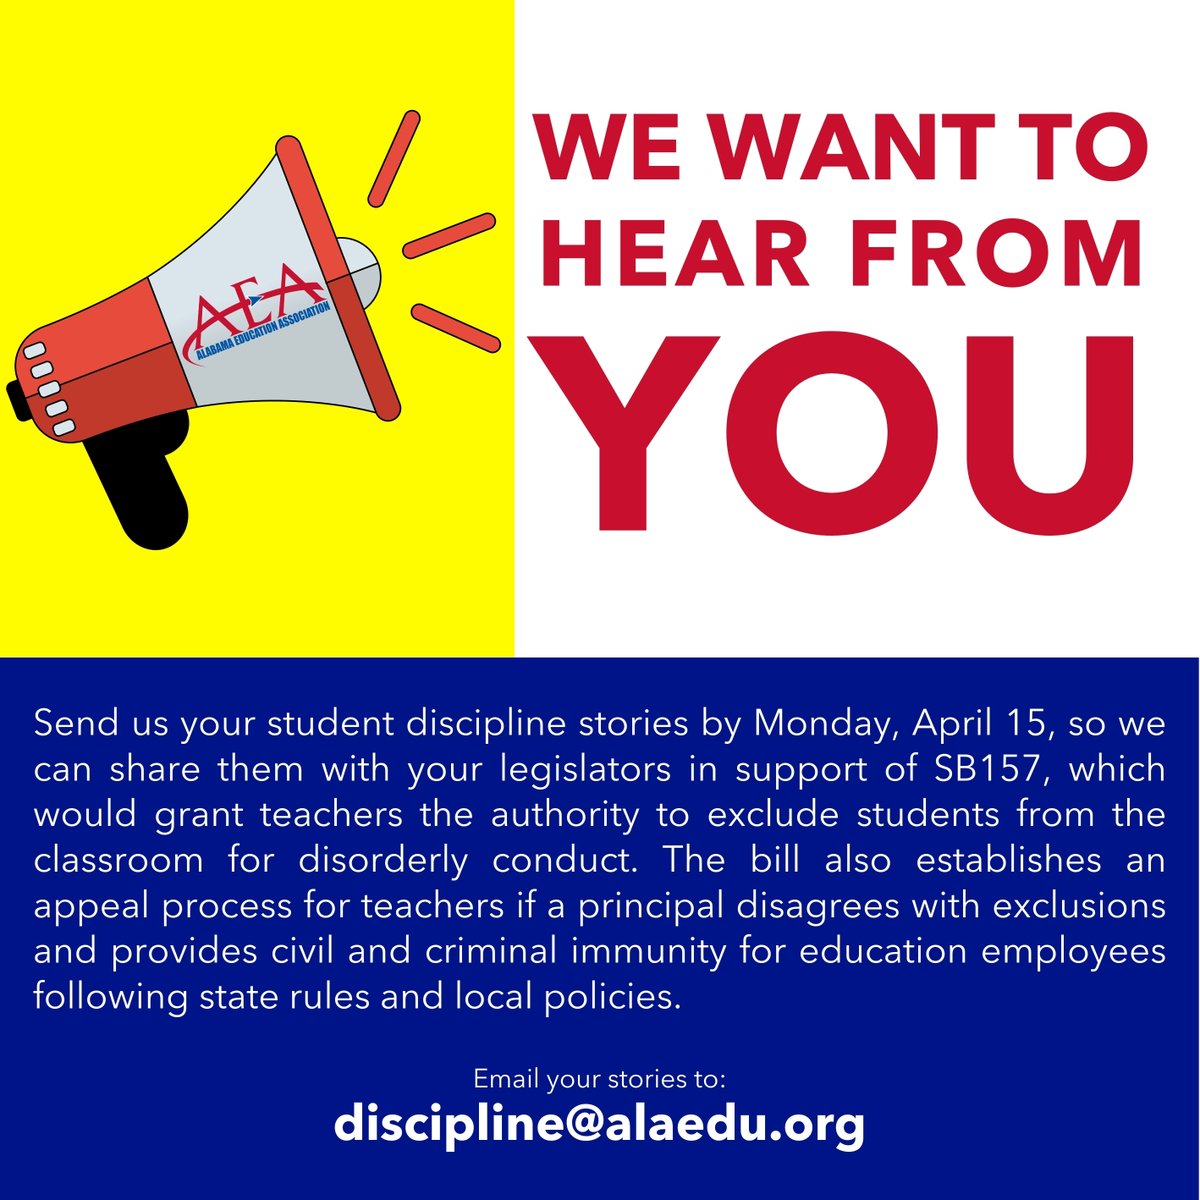 Do you have a challenging student discipline experience? Please share with us via email to discipline@alaedu.org by Monday, April 15th! These stories will assist us in advocating on your behalf as we work to try and pass SB157. You may remain anonymous. #myAEA